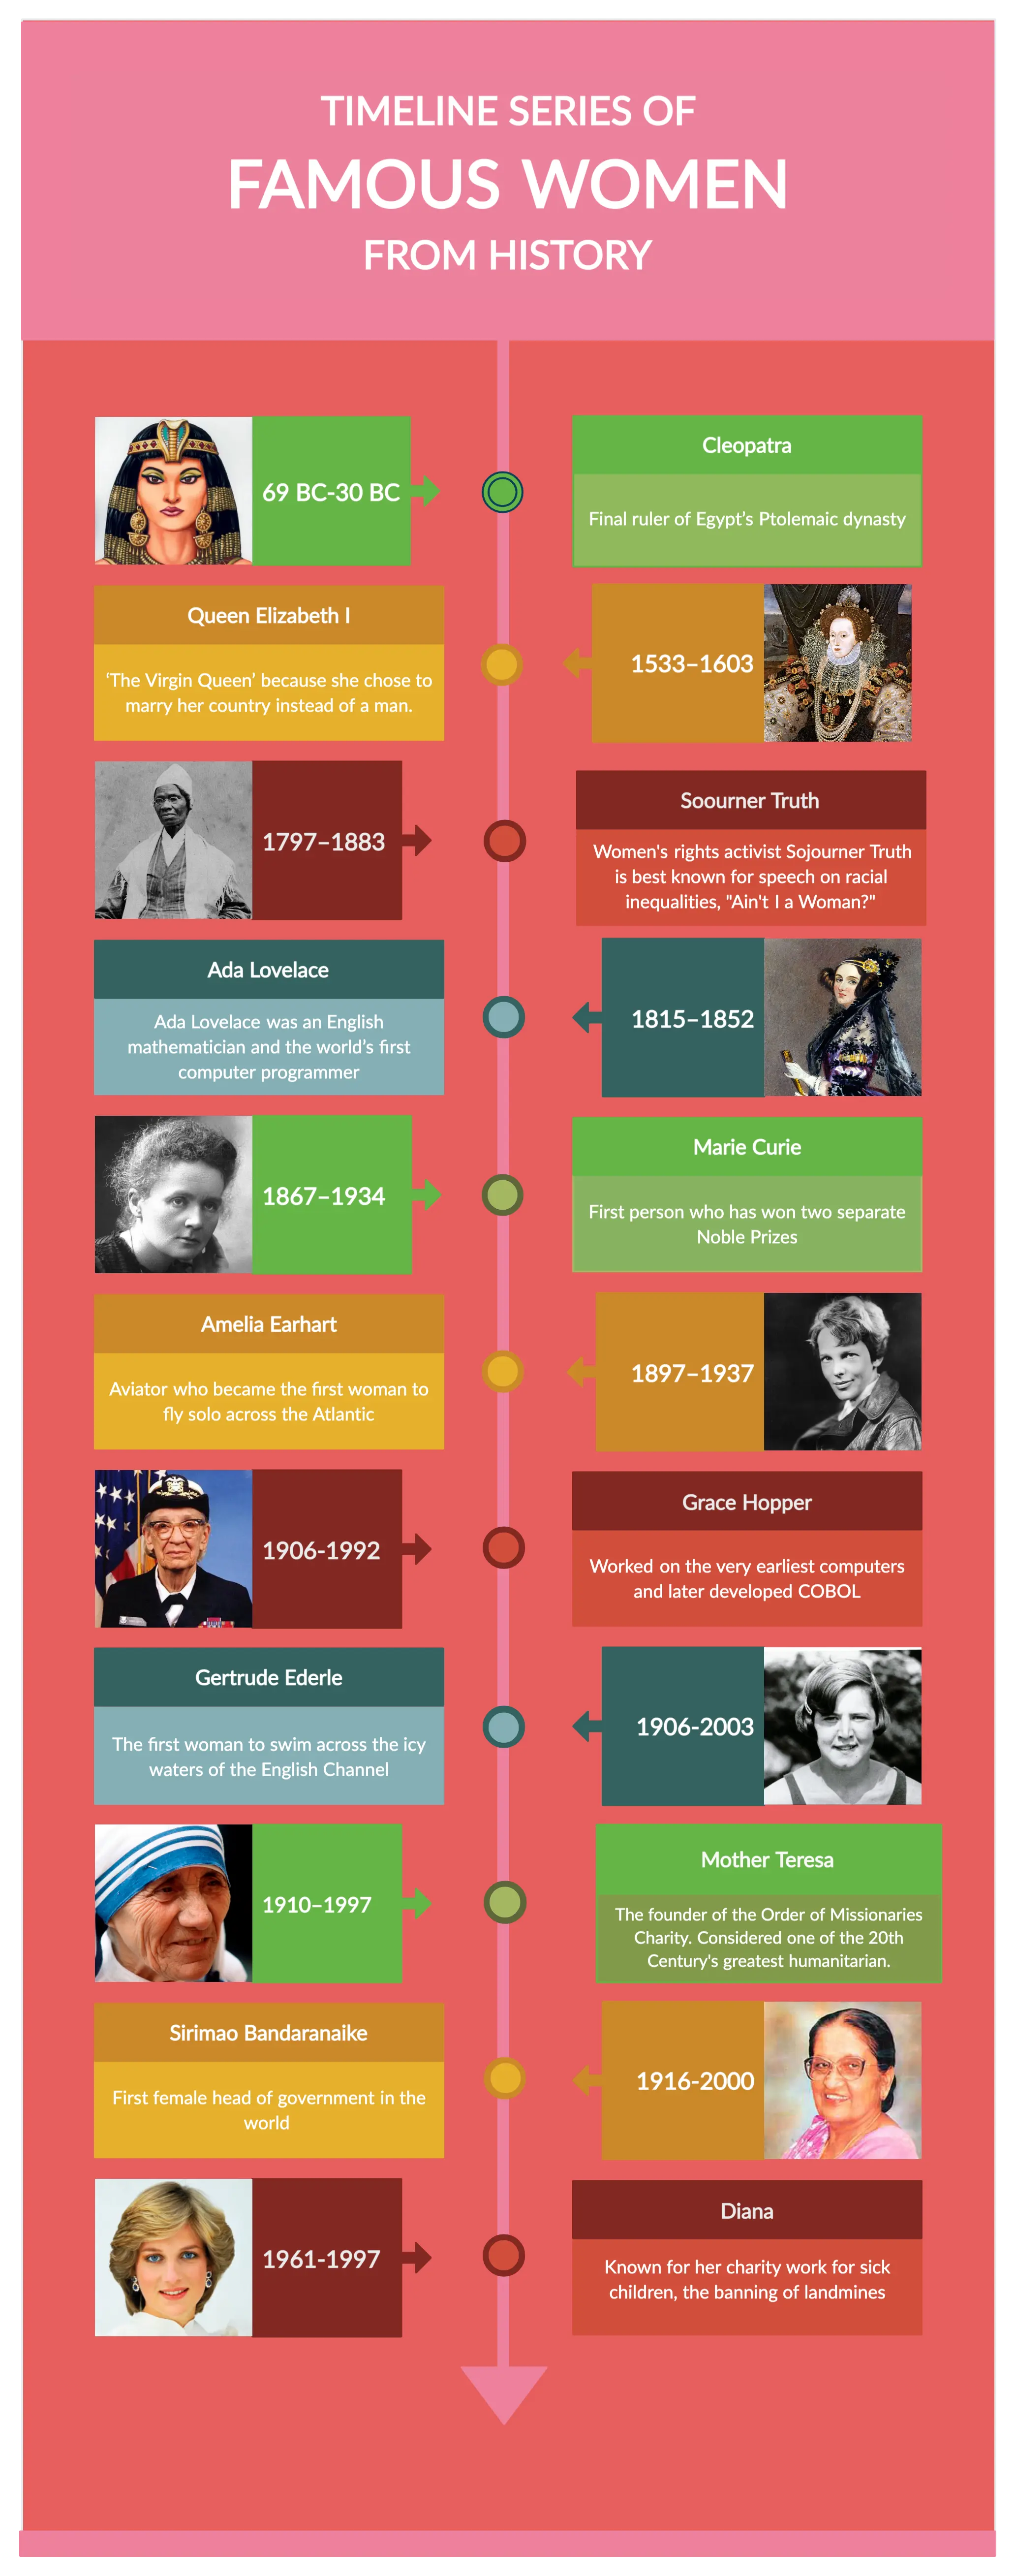 Timeline Series Of Famous Women in History 